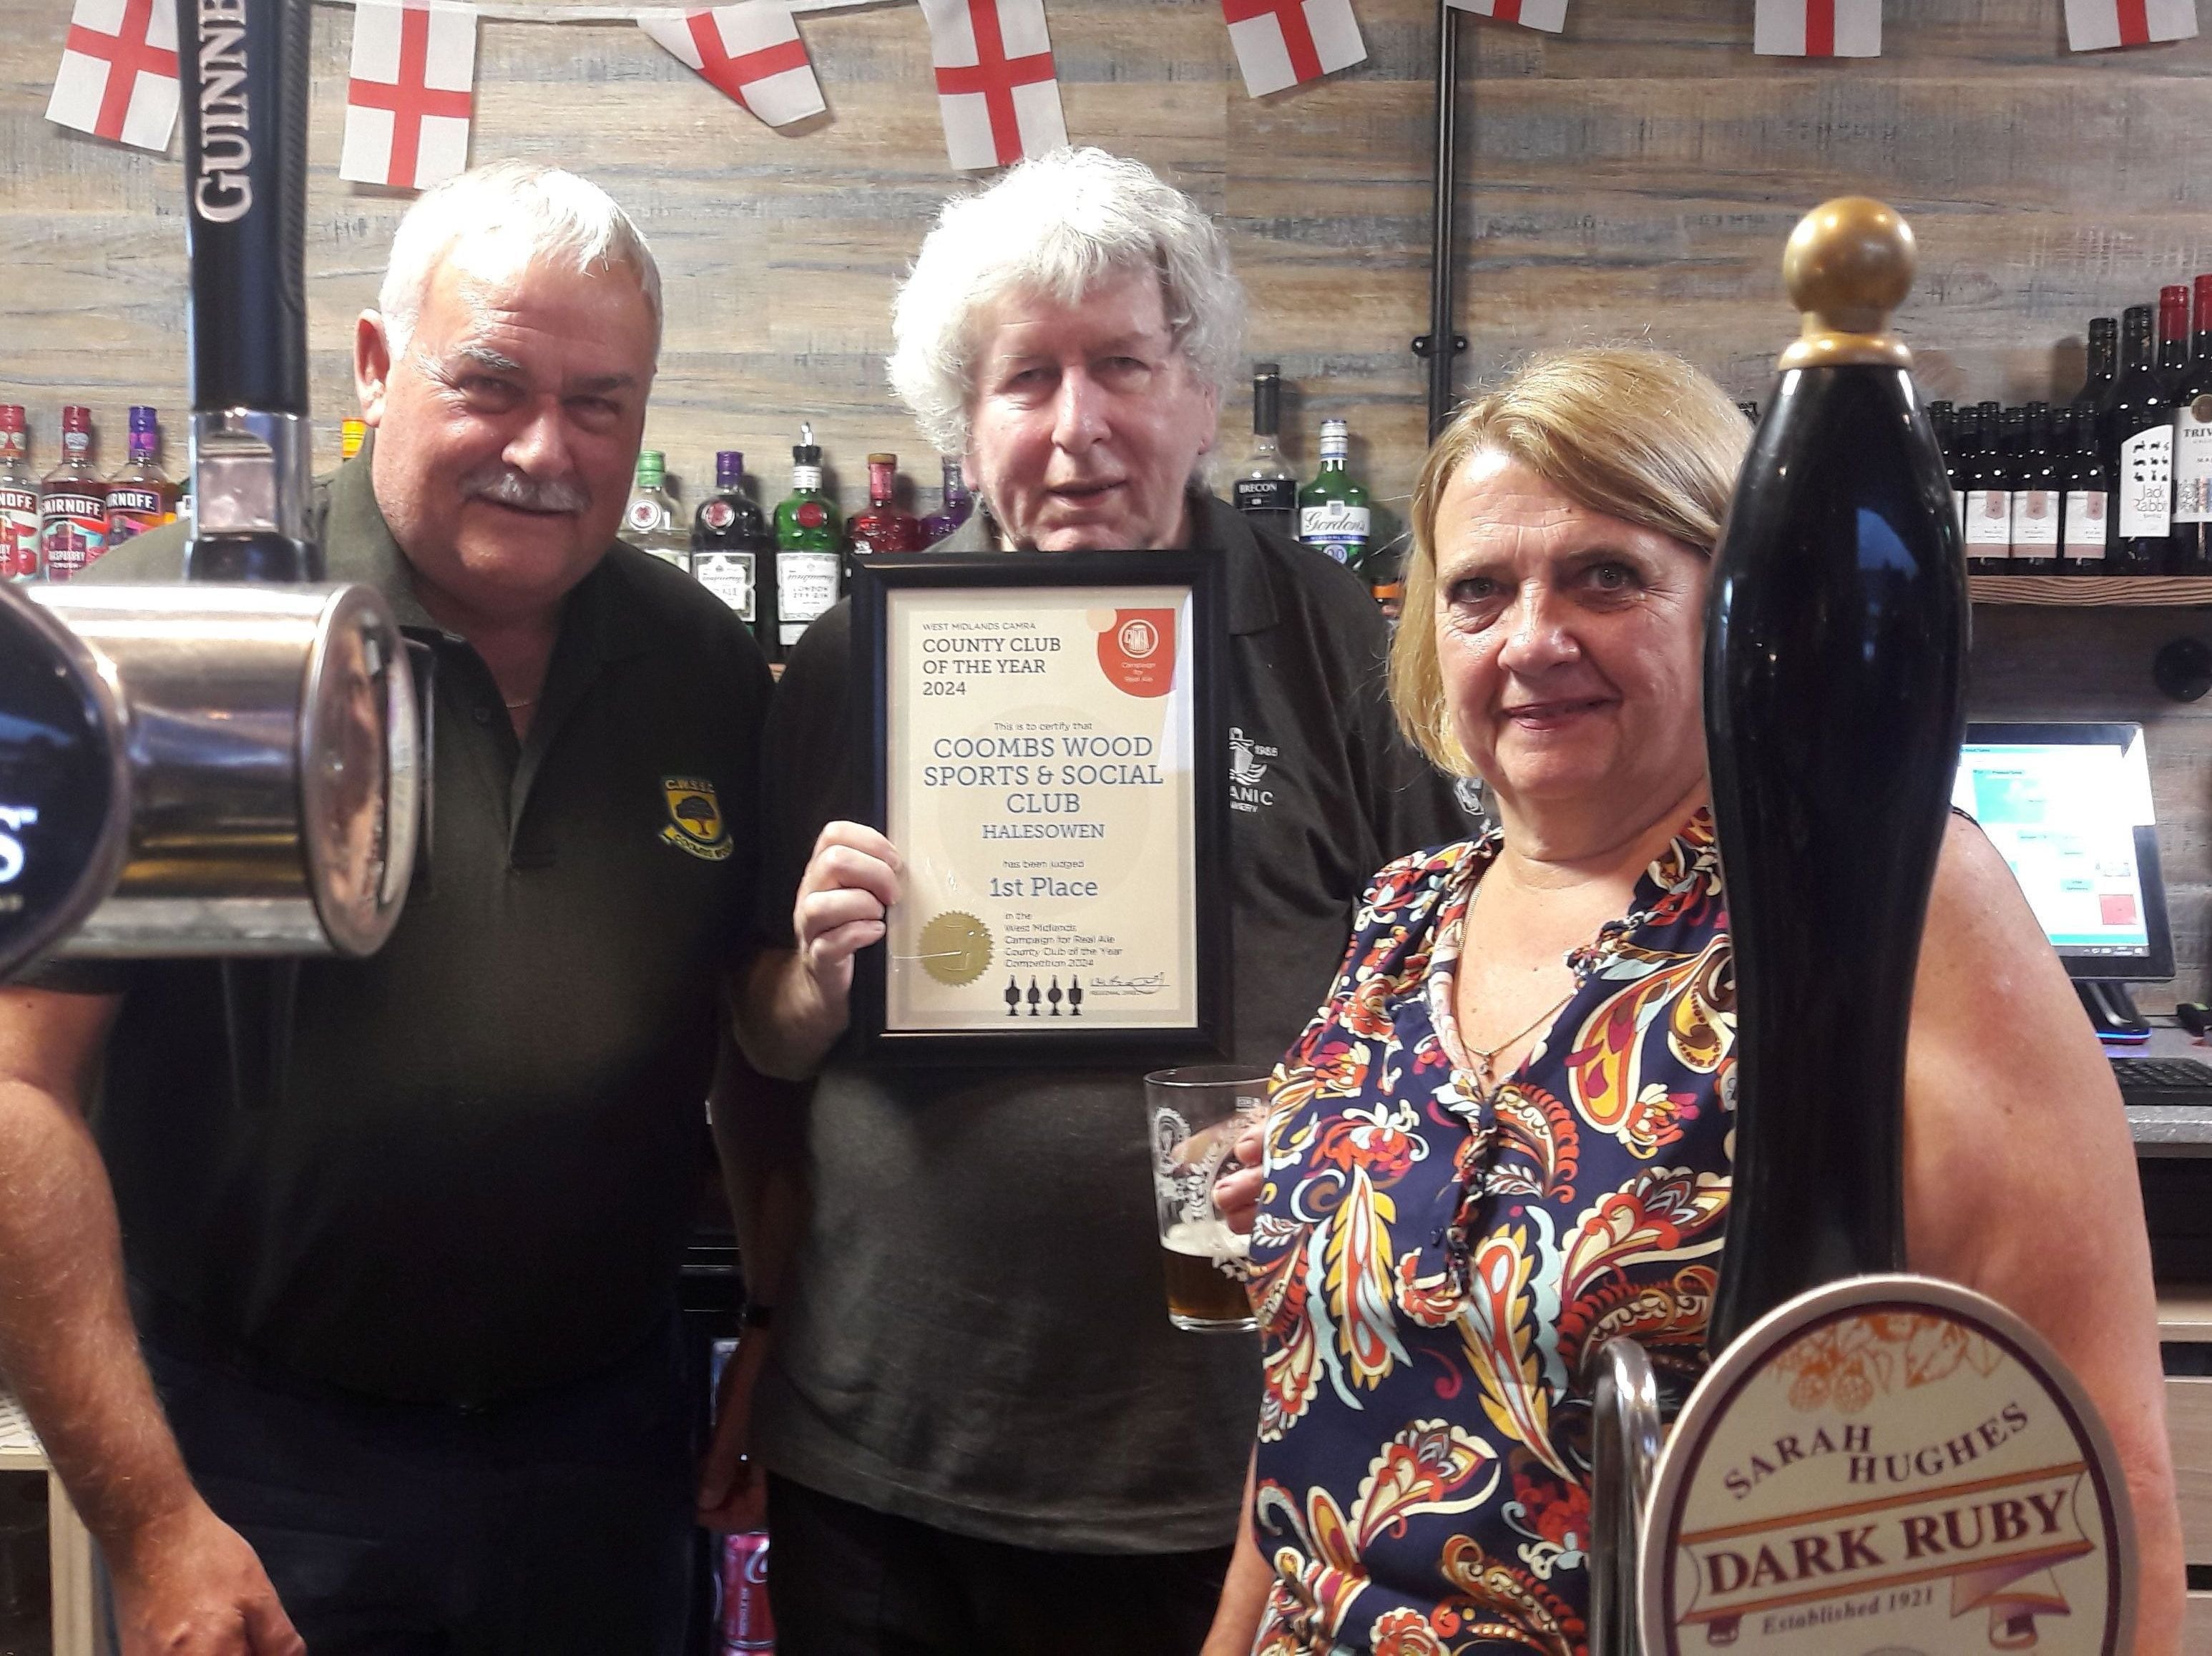 Halesowen social club which offers real ales wins county club of the year award